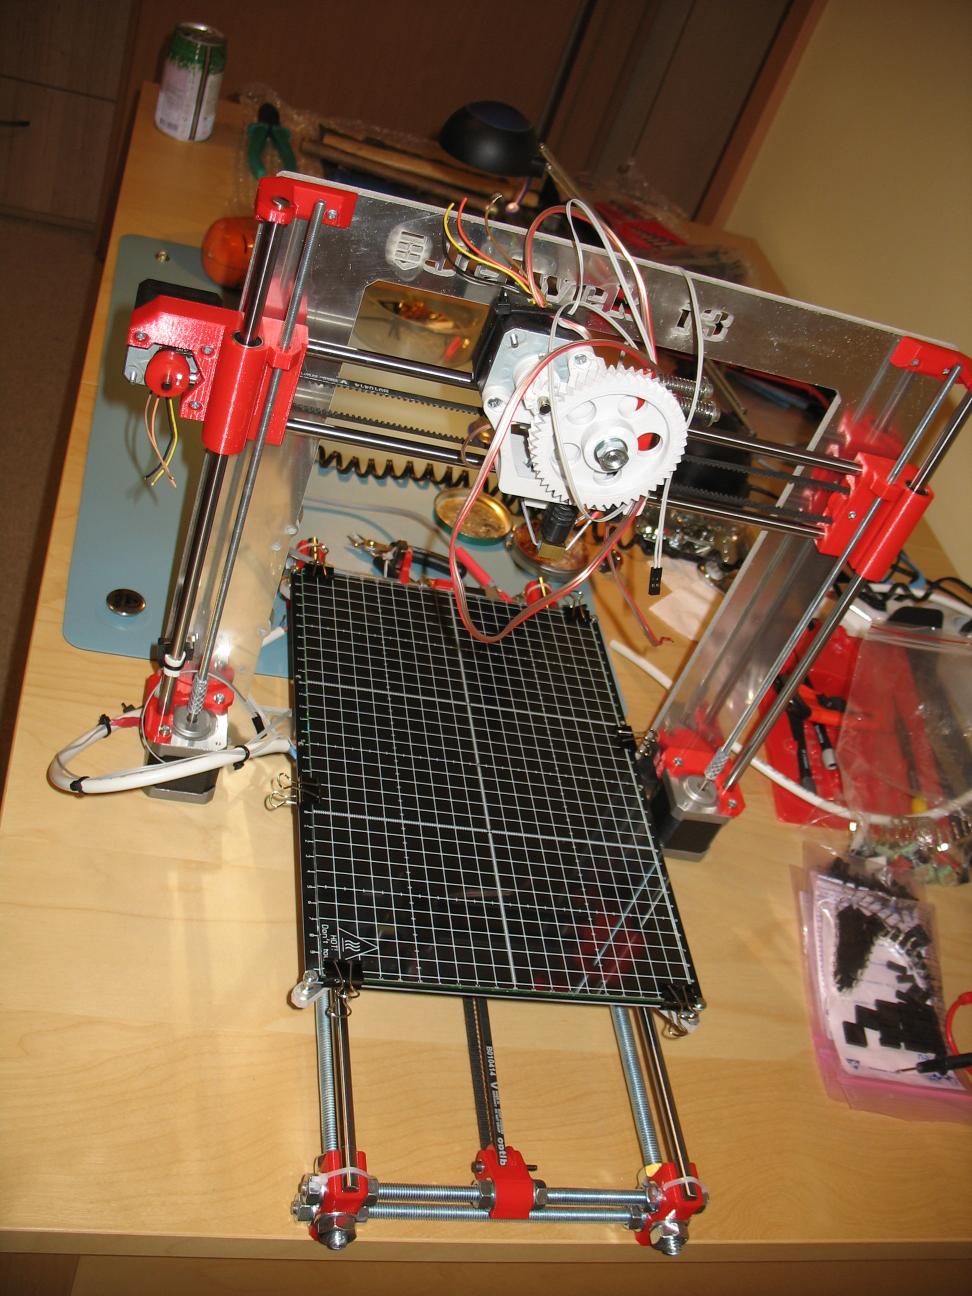 extruder, heated bed and cabling